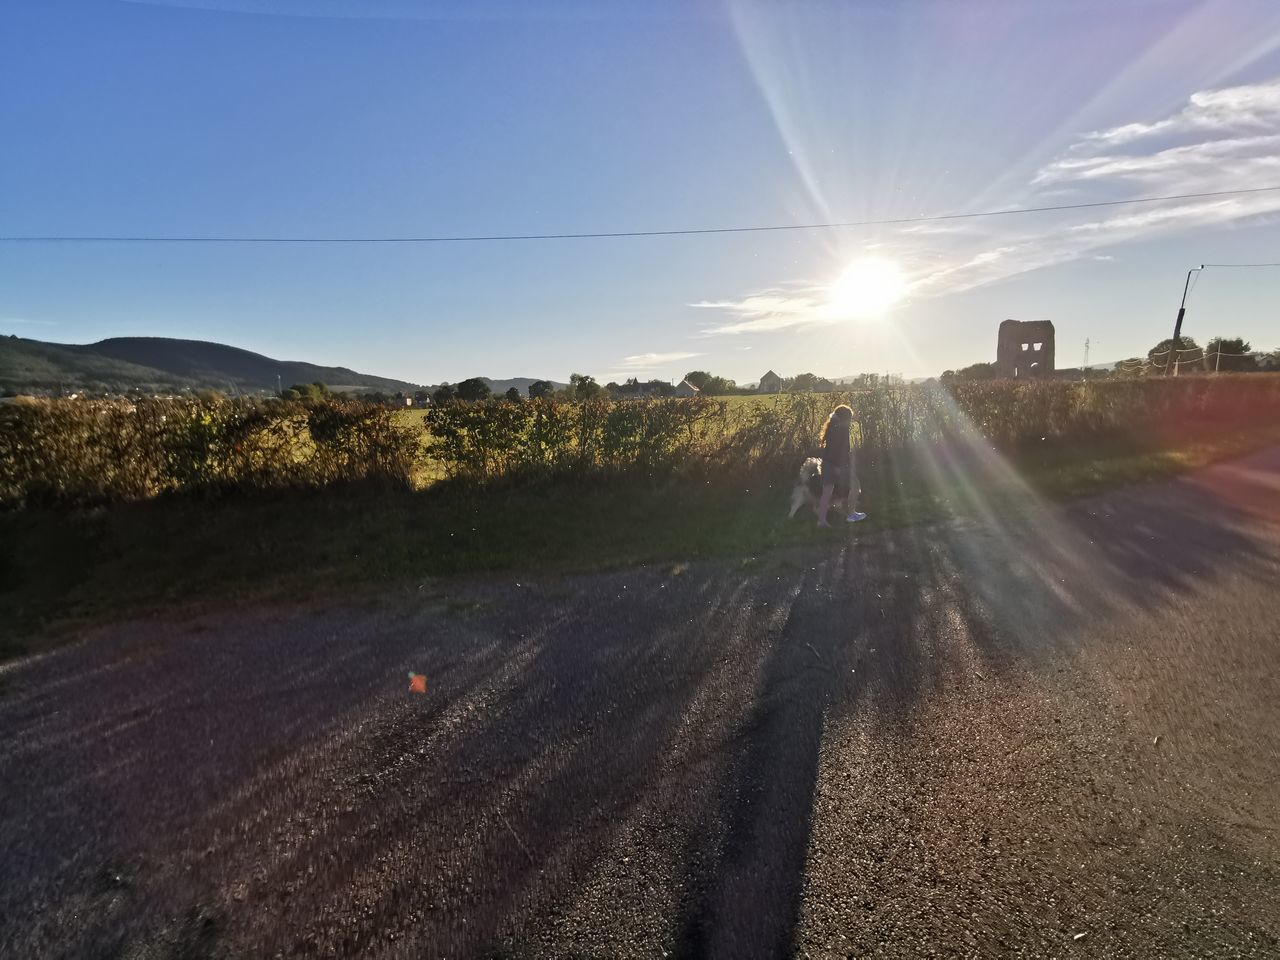 sky, horizon, landscape, nature, road, sunlight, transportation, morning, environment, lens flare, sun, land, hill, sunbeam, scenics - nature, field, plant, outdoors, rural area, beauty in nature, dusk, rural scene, day, dirt, cloud, travel, infrastructure, soil, no people, sunny, city, mode of transportation, blue